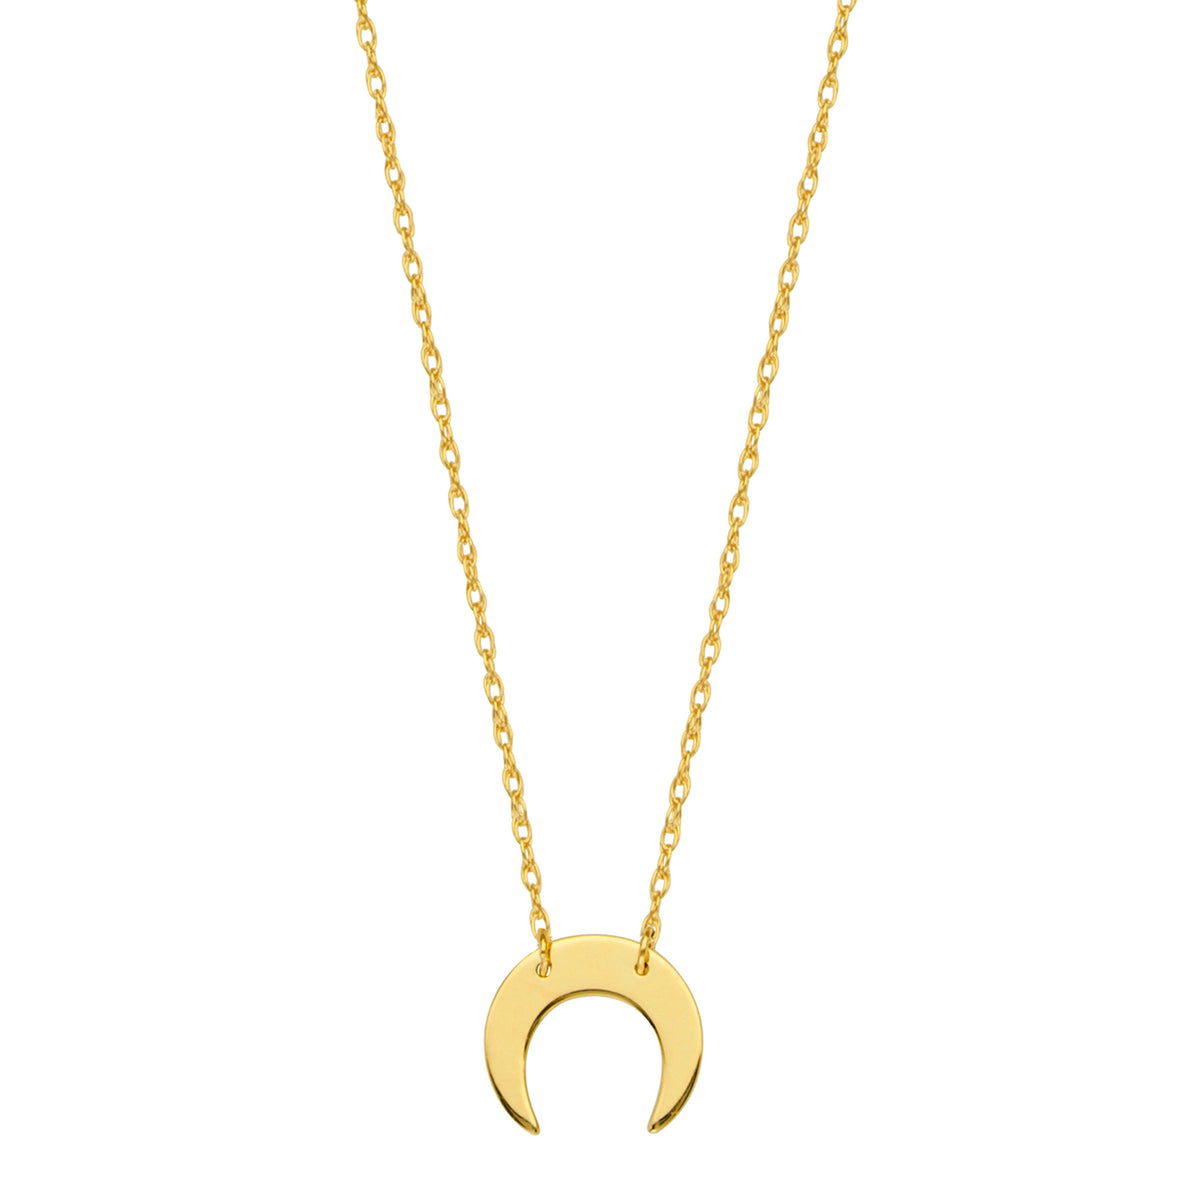 14K Yellow Gold Mini Crescent Moon Pendant Necklace, 16" To 18" Adjustable fine designer jewelry for men and women